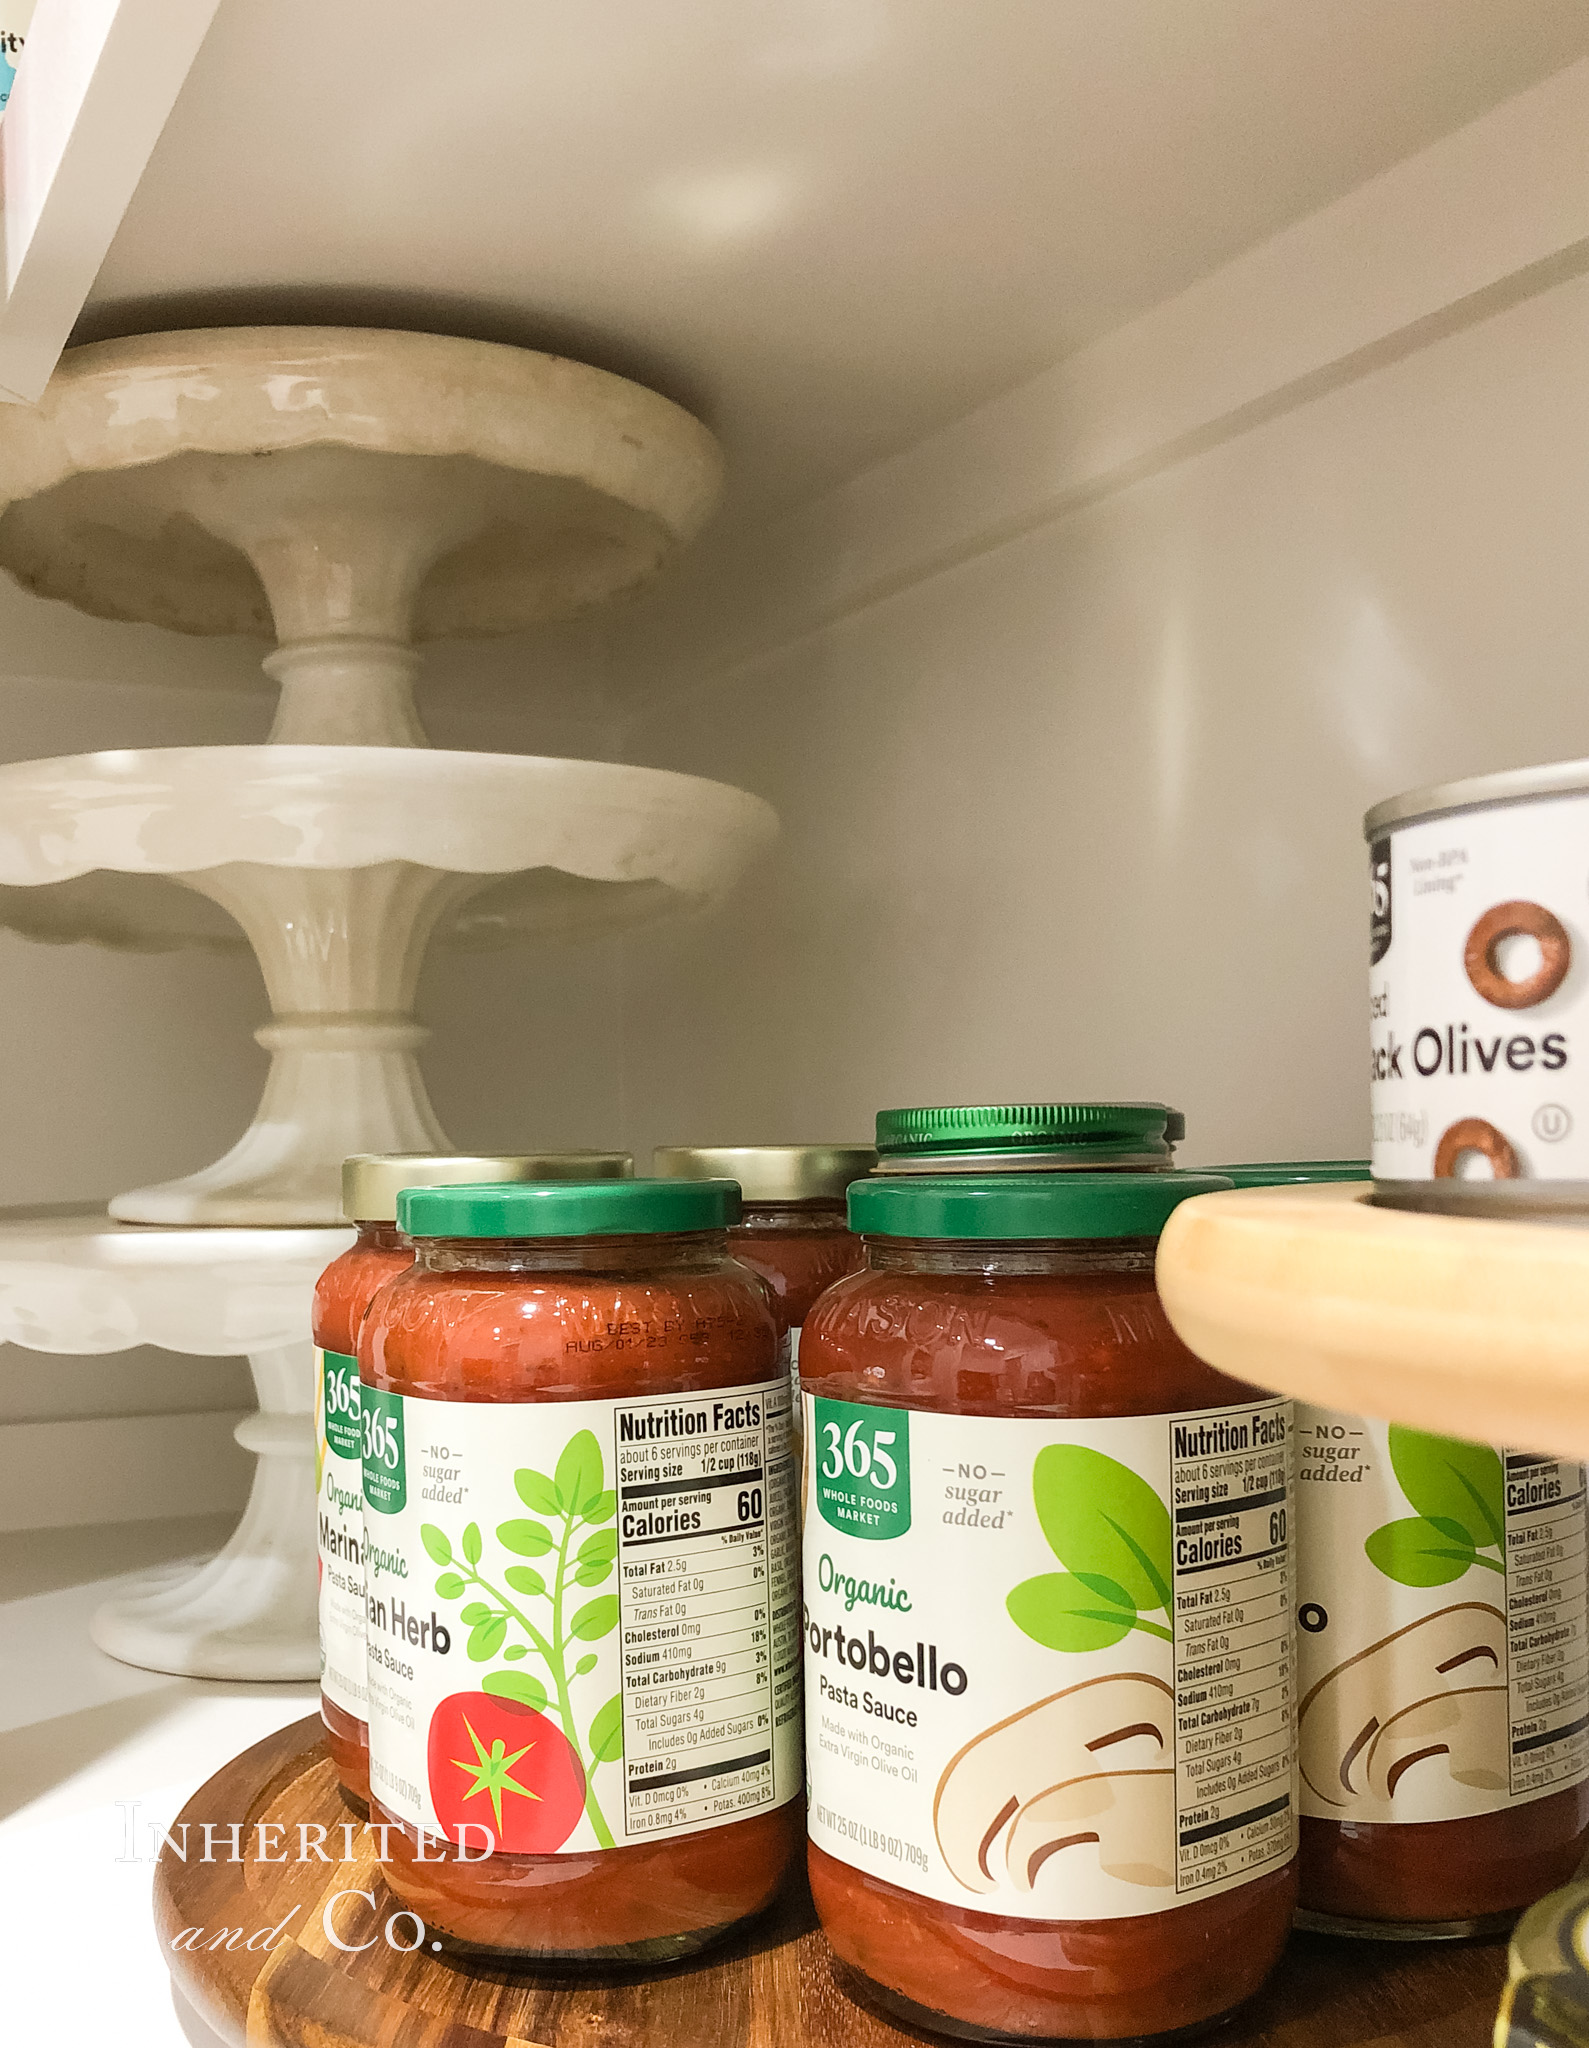 stack of antique ironstone cakestands and a lazy susan with pasta sauce on a pantry shelf